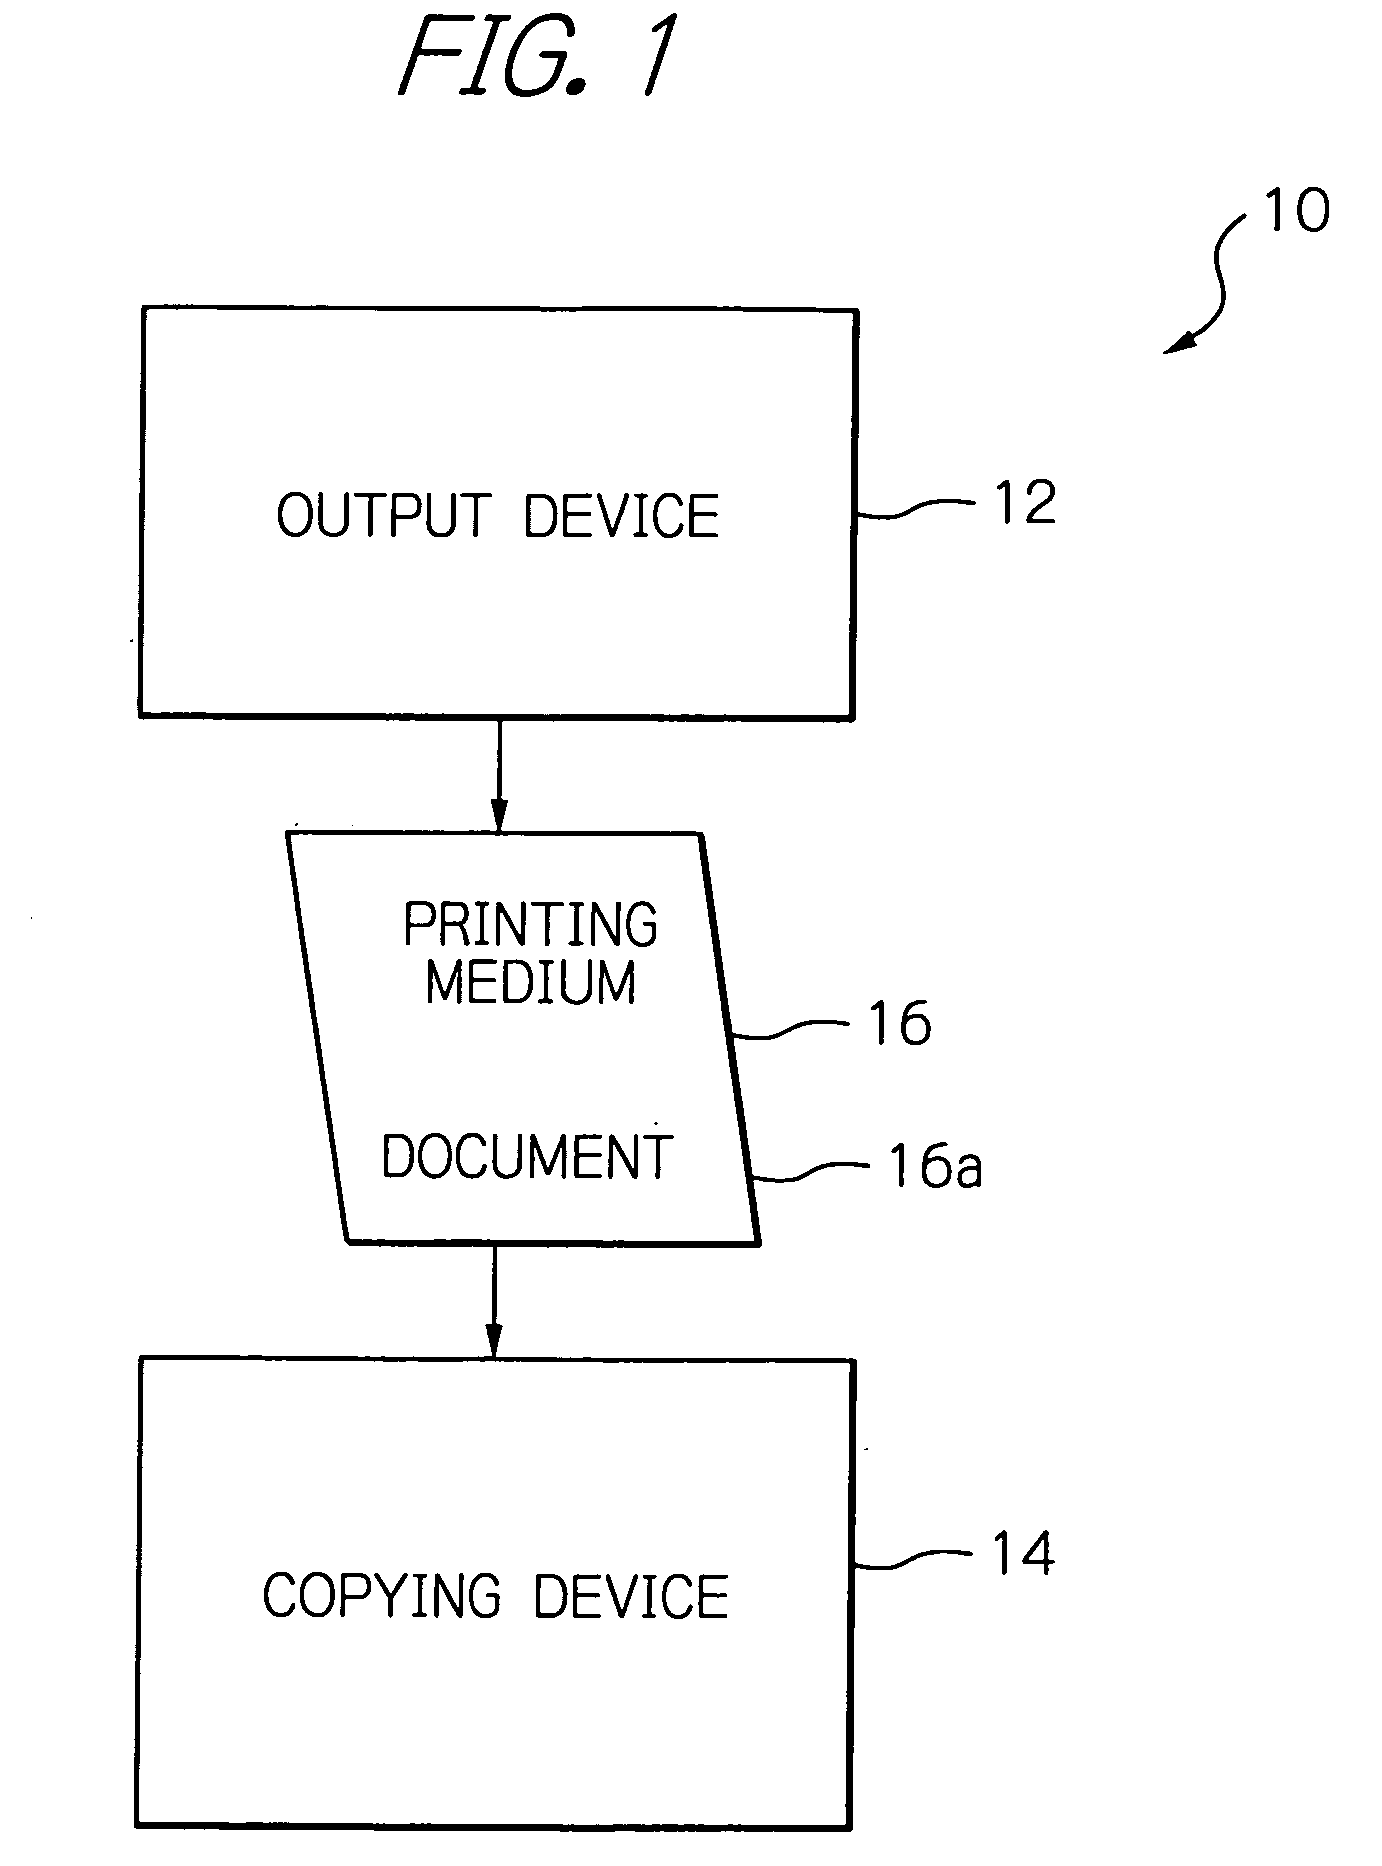 System for managing flexible copying with information leakage prevented and/or detected